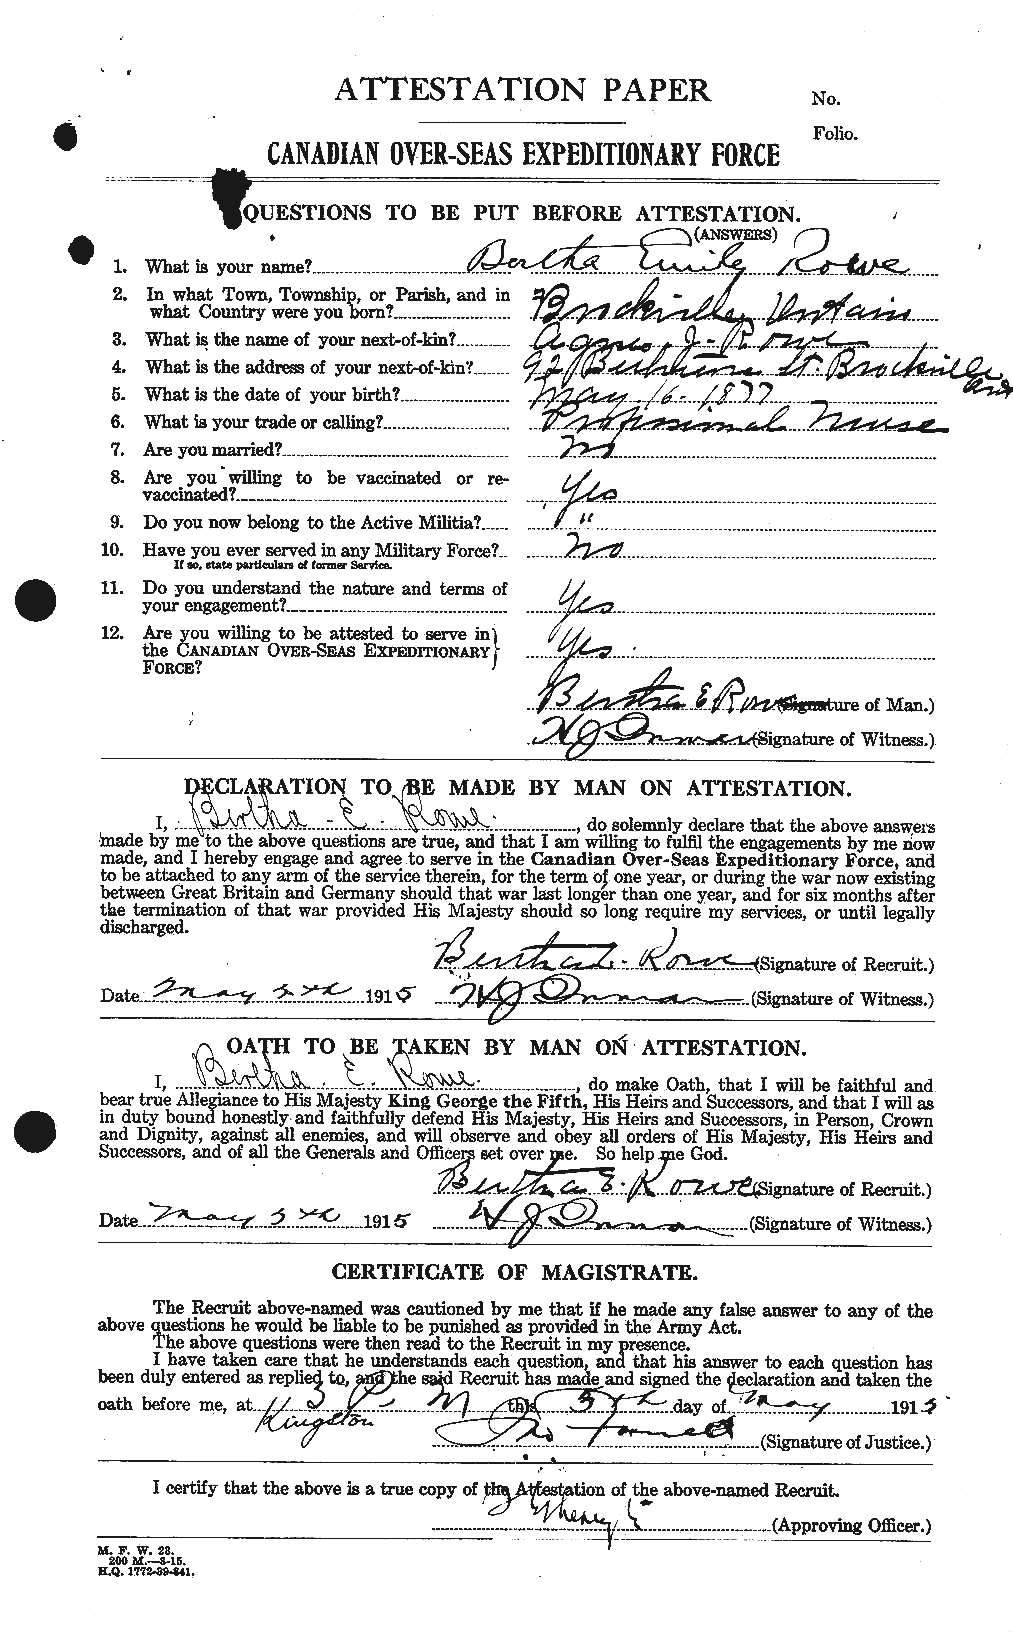 Personnel Records of the First World War - CEF 615810a